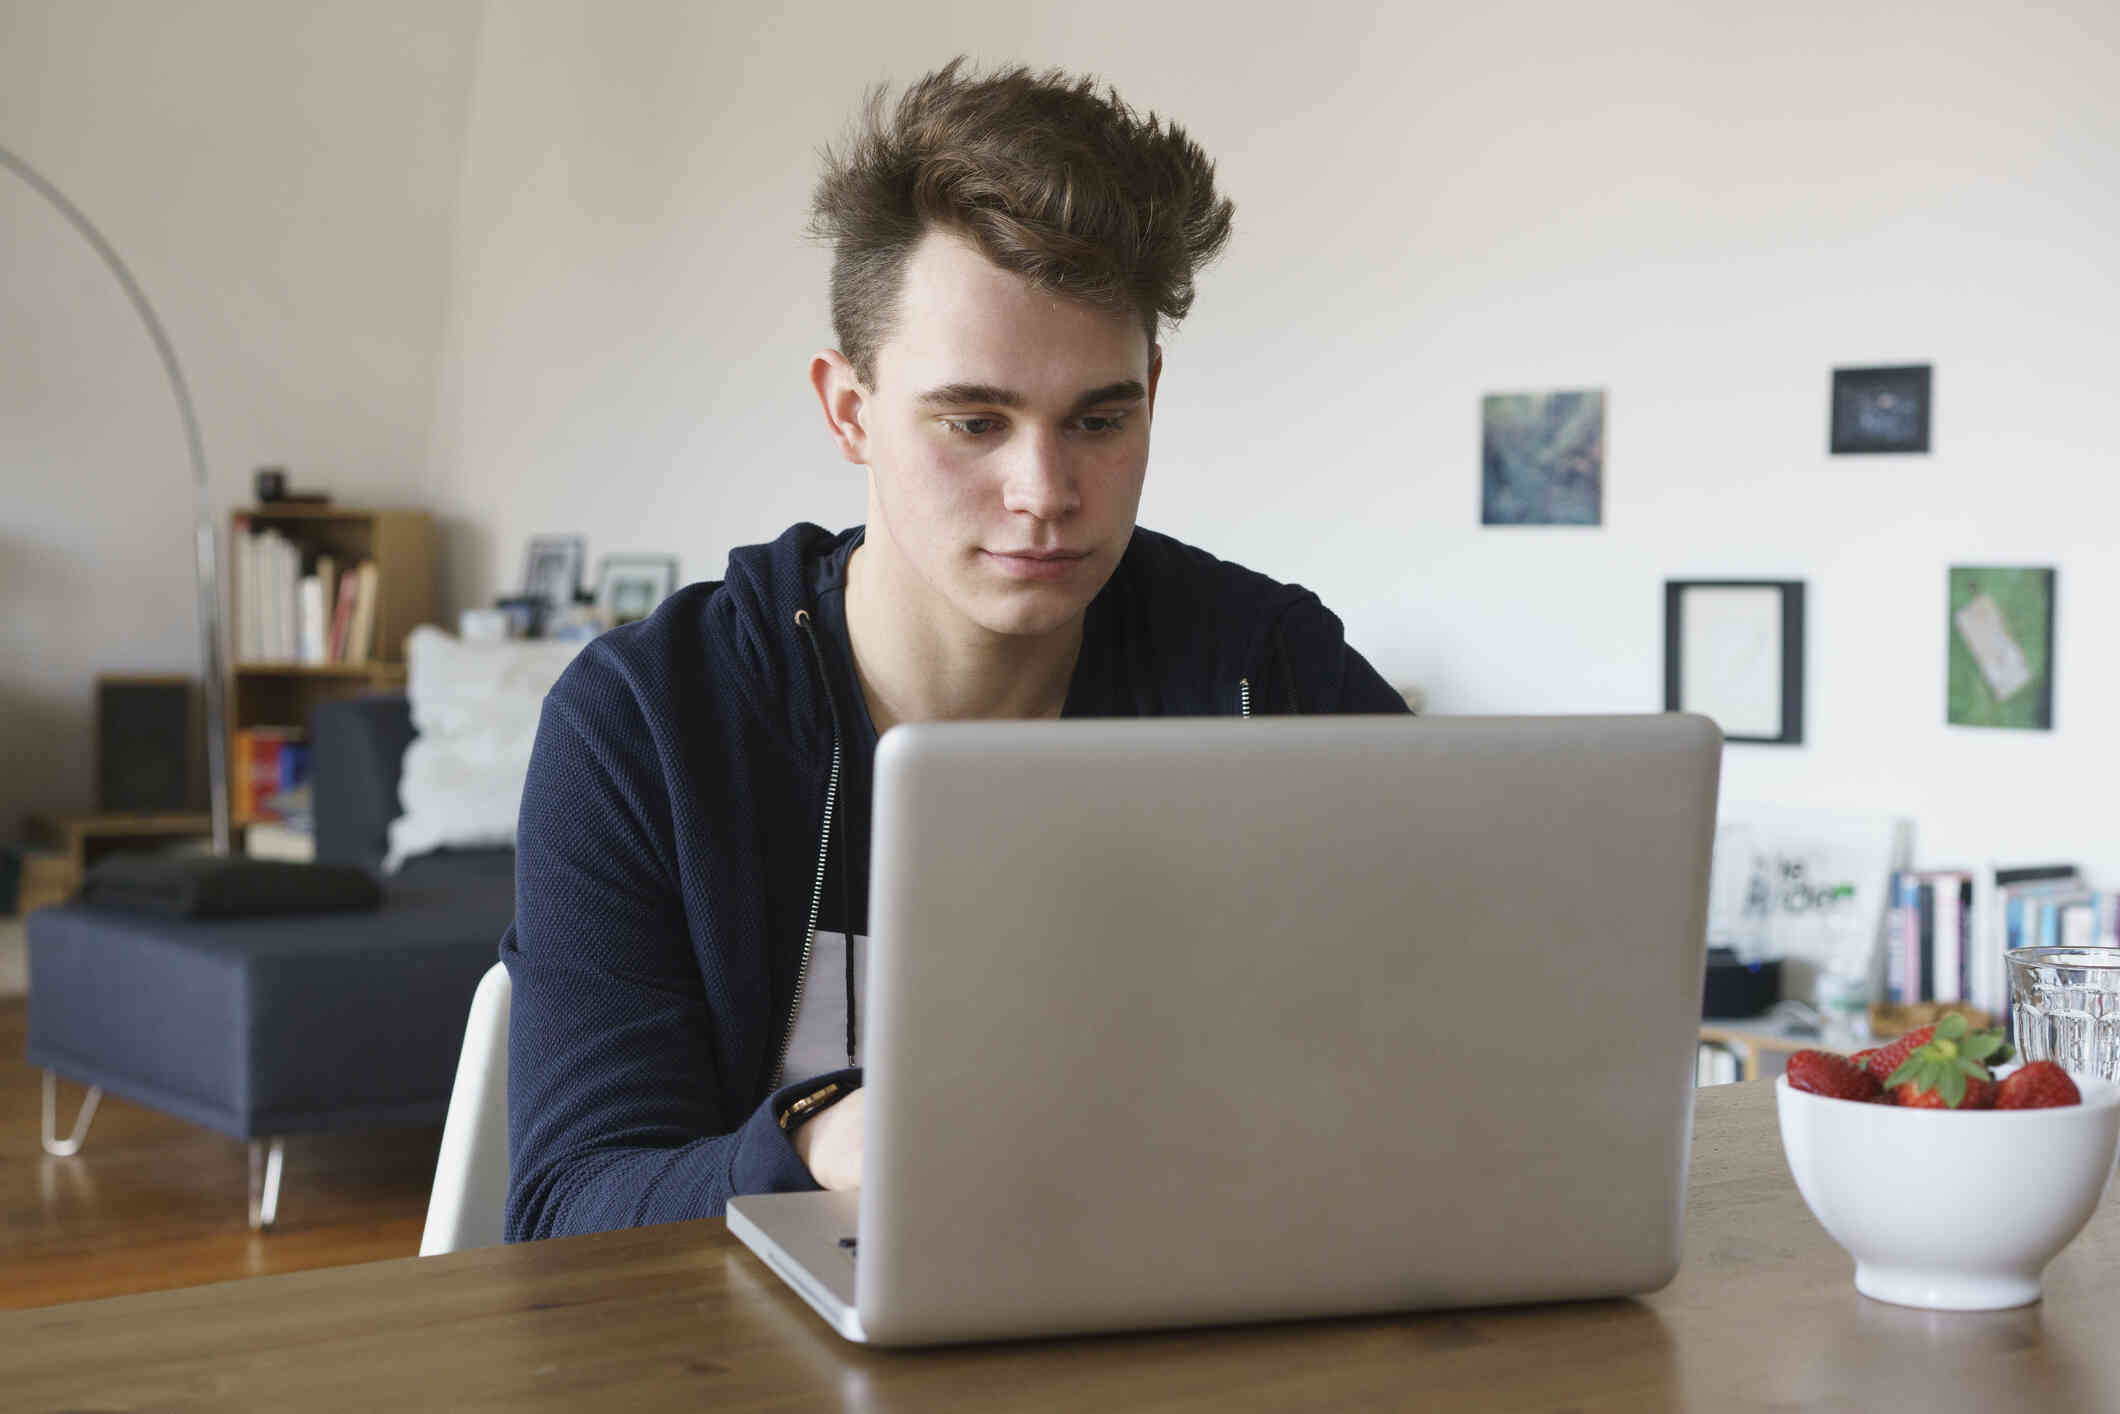 A teen boy sits in a chair ant a table behind a laptop and looks at the screen with a serious expression.